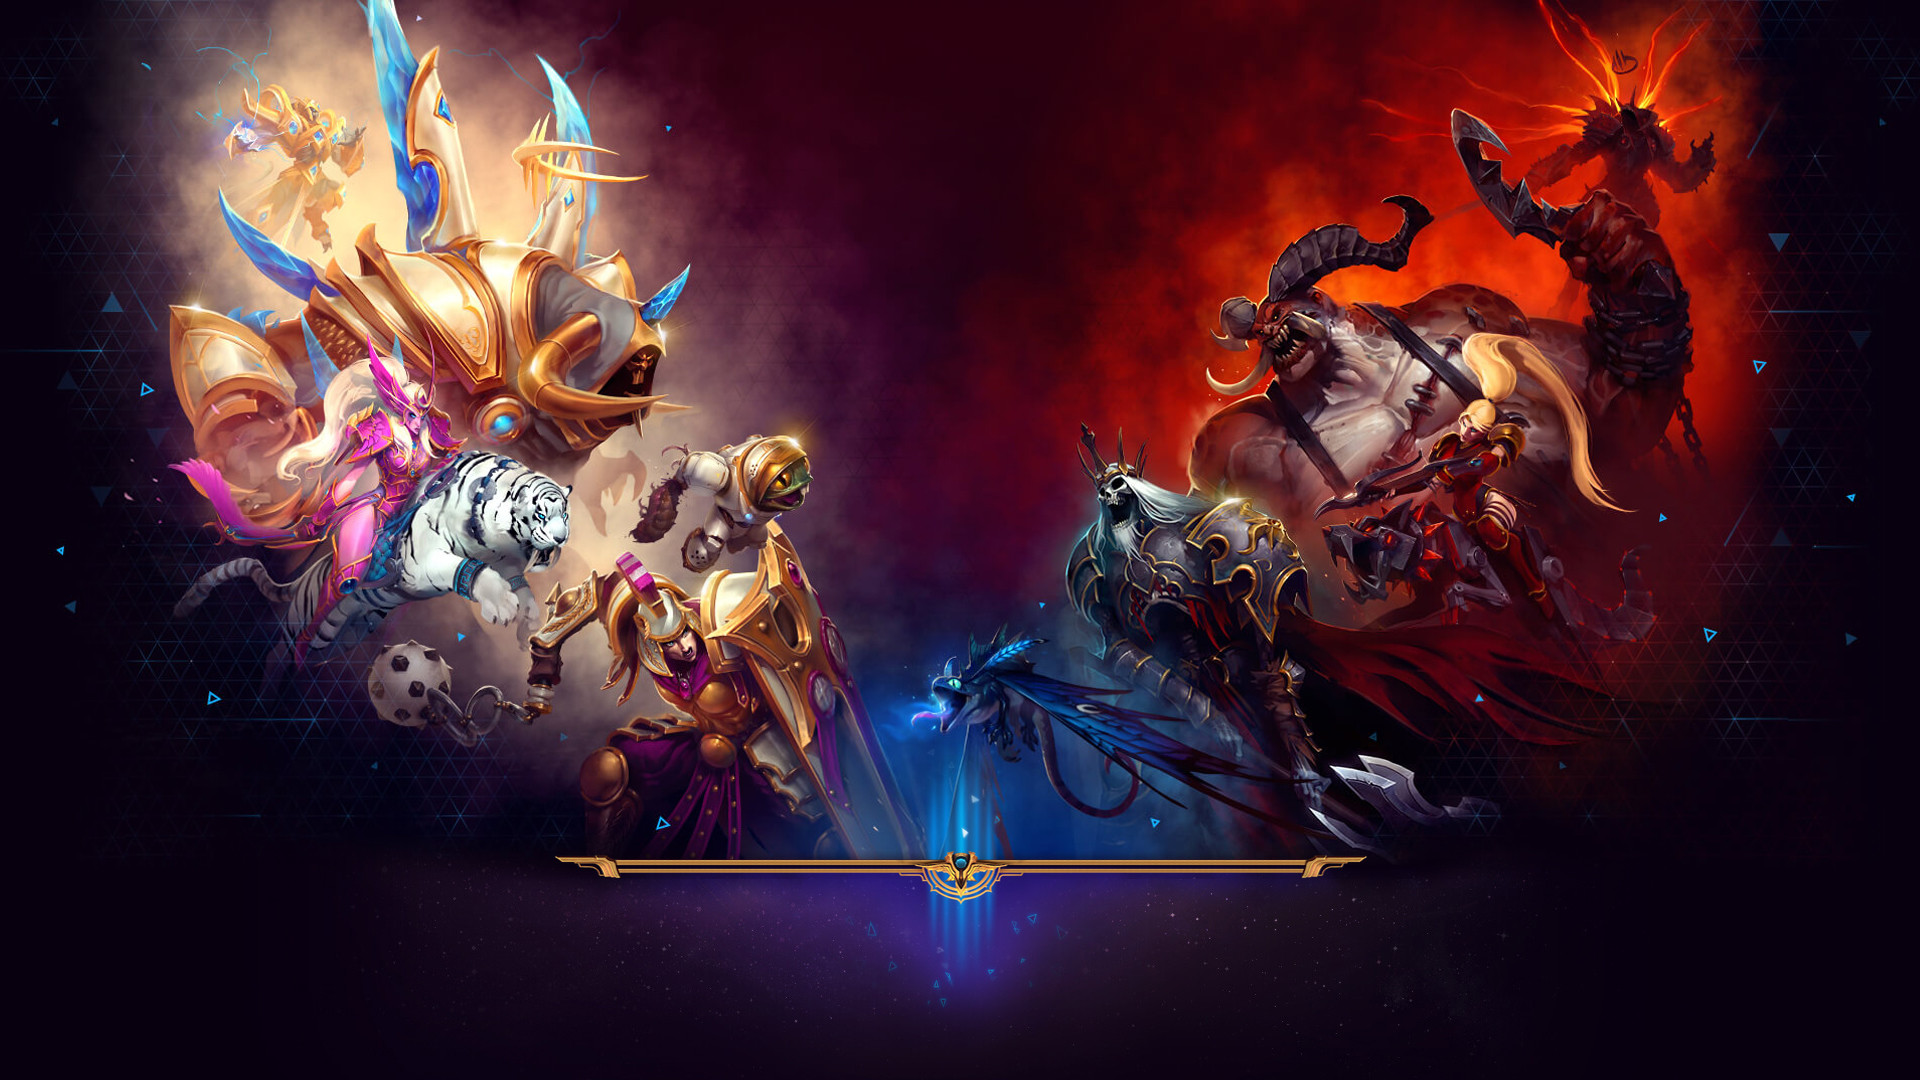 1920x1080 Awesome Heroes Of The Storm Wallpapers | Heroes Of The Storm Wallpapers